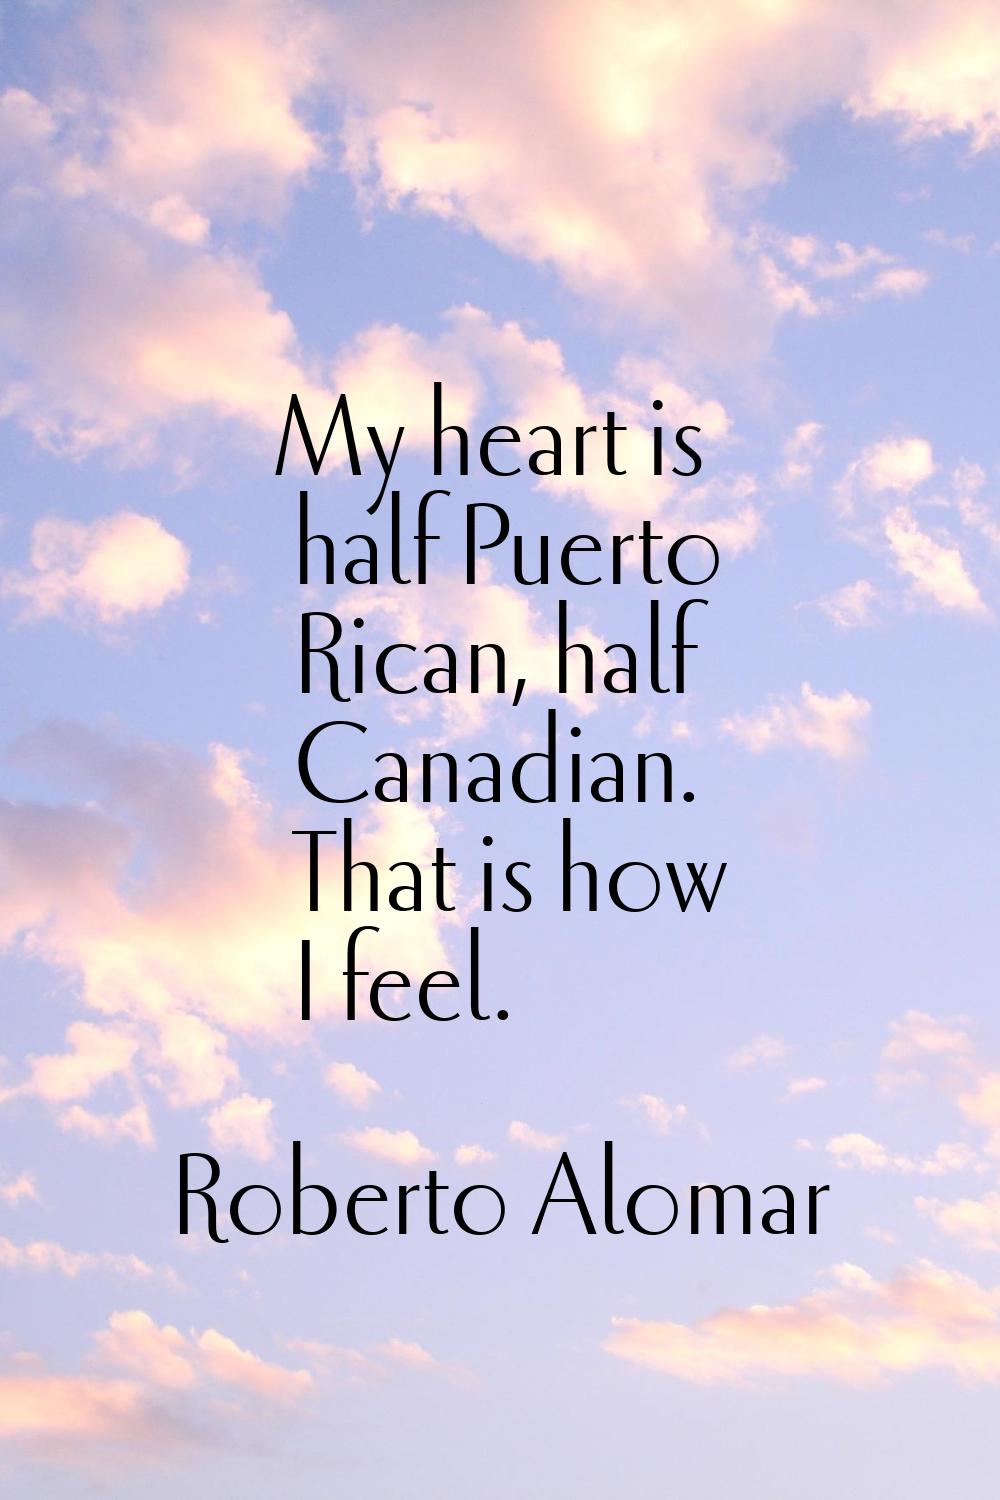 My heart is half Puerto Rican, half Canadian. That is how I feel.